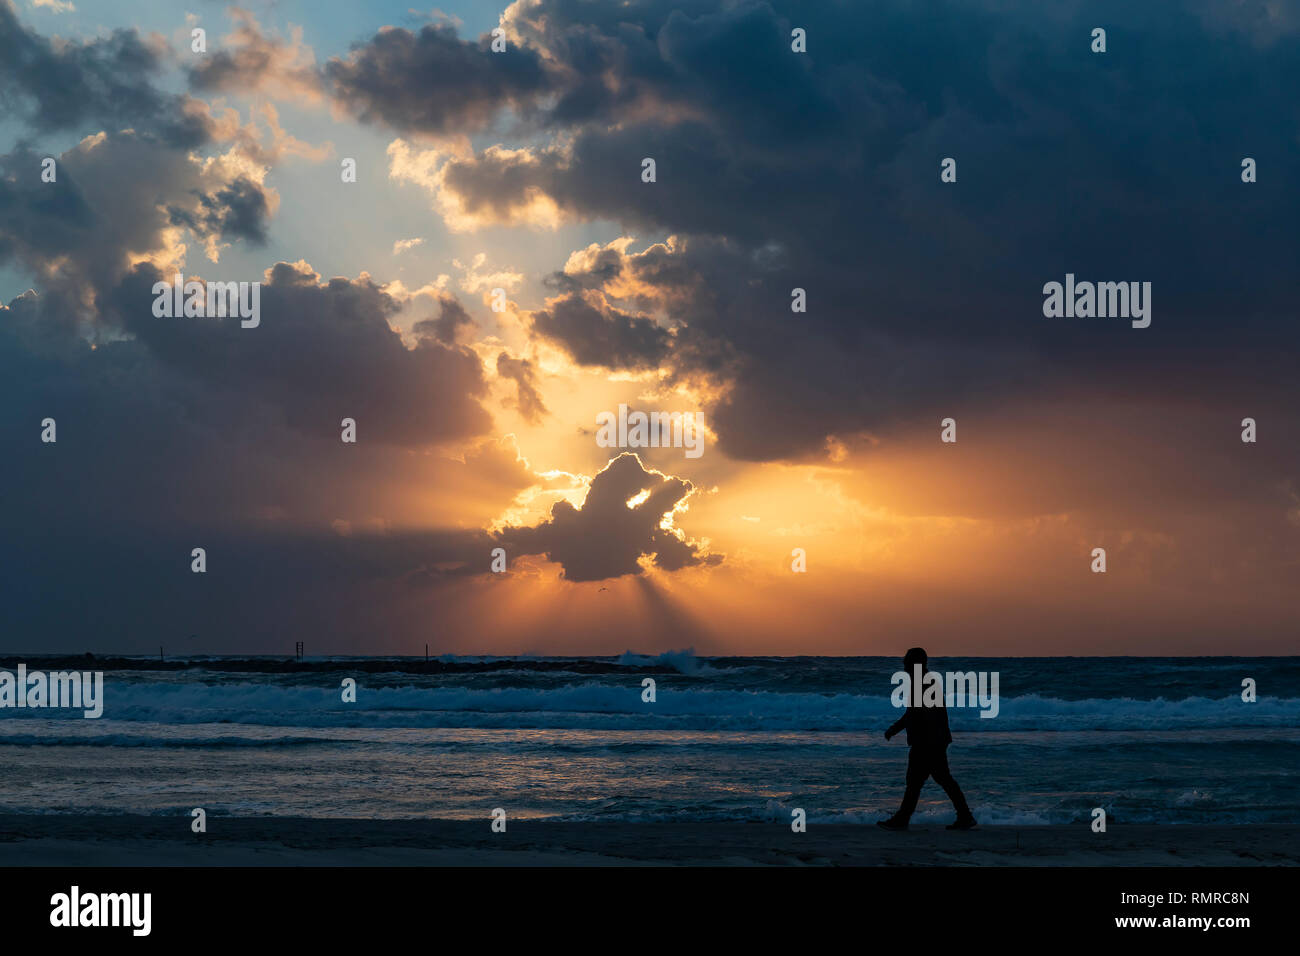 A silhouette of a man waking on the beach in sunset time, photographed in Tel Aviv, Israel Stock Photo